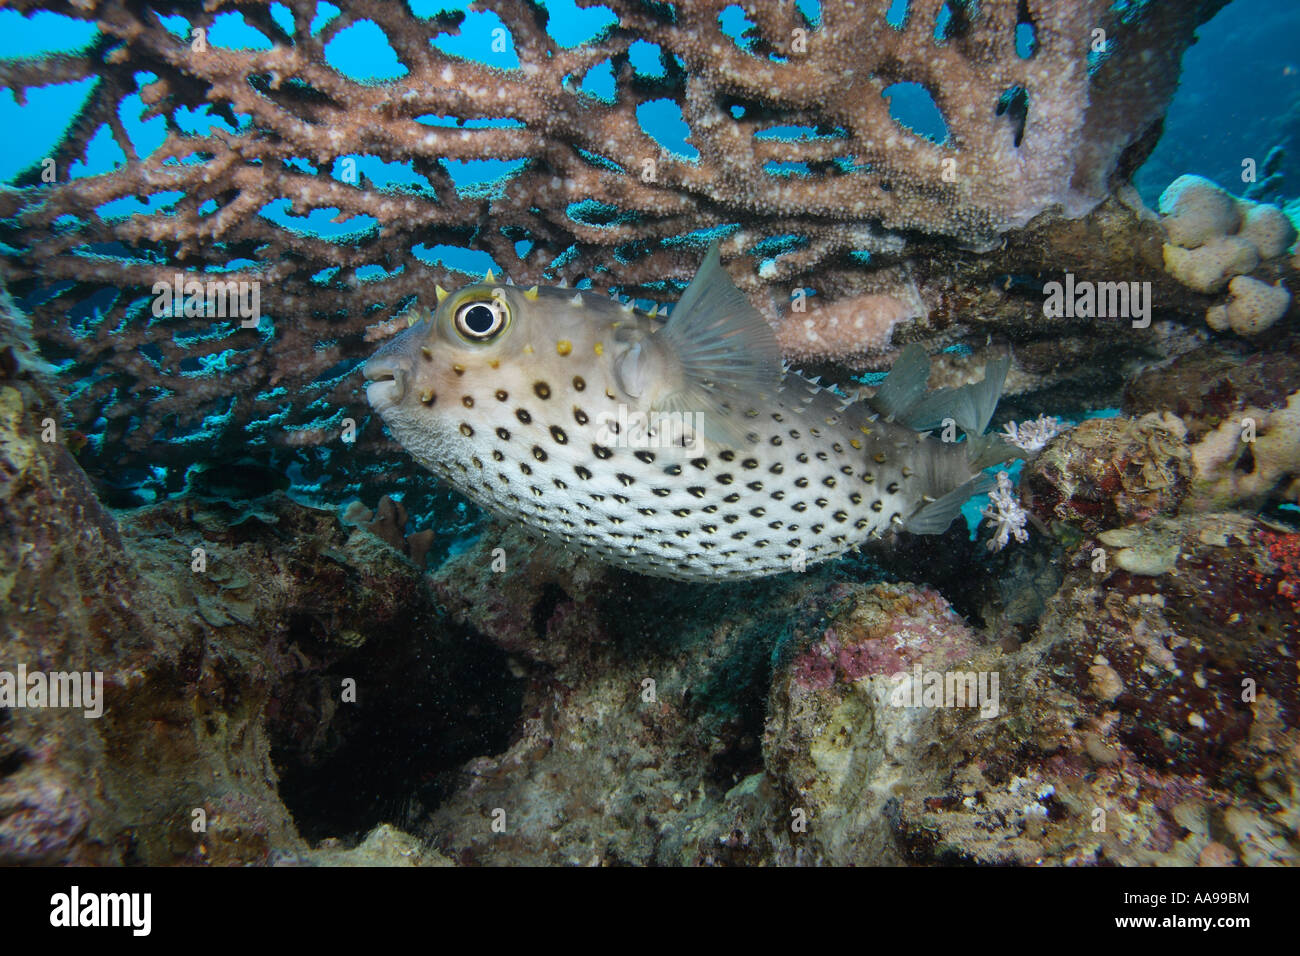 Yellowspotted Burrfish Porcupinefish Red Sea Table Coral acropora Stock Photo